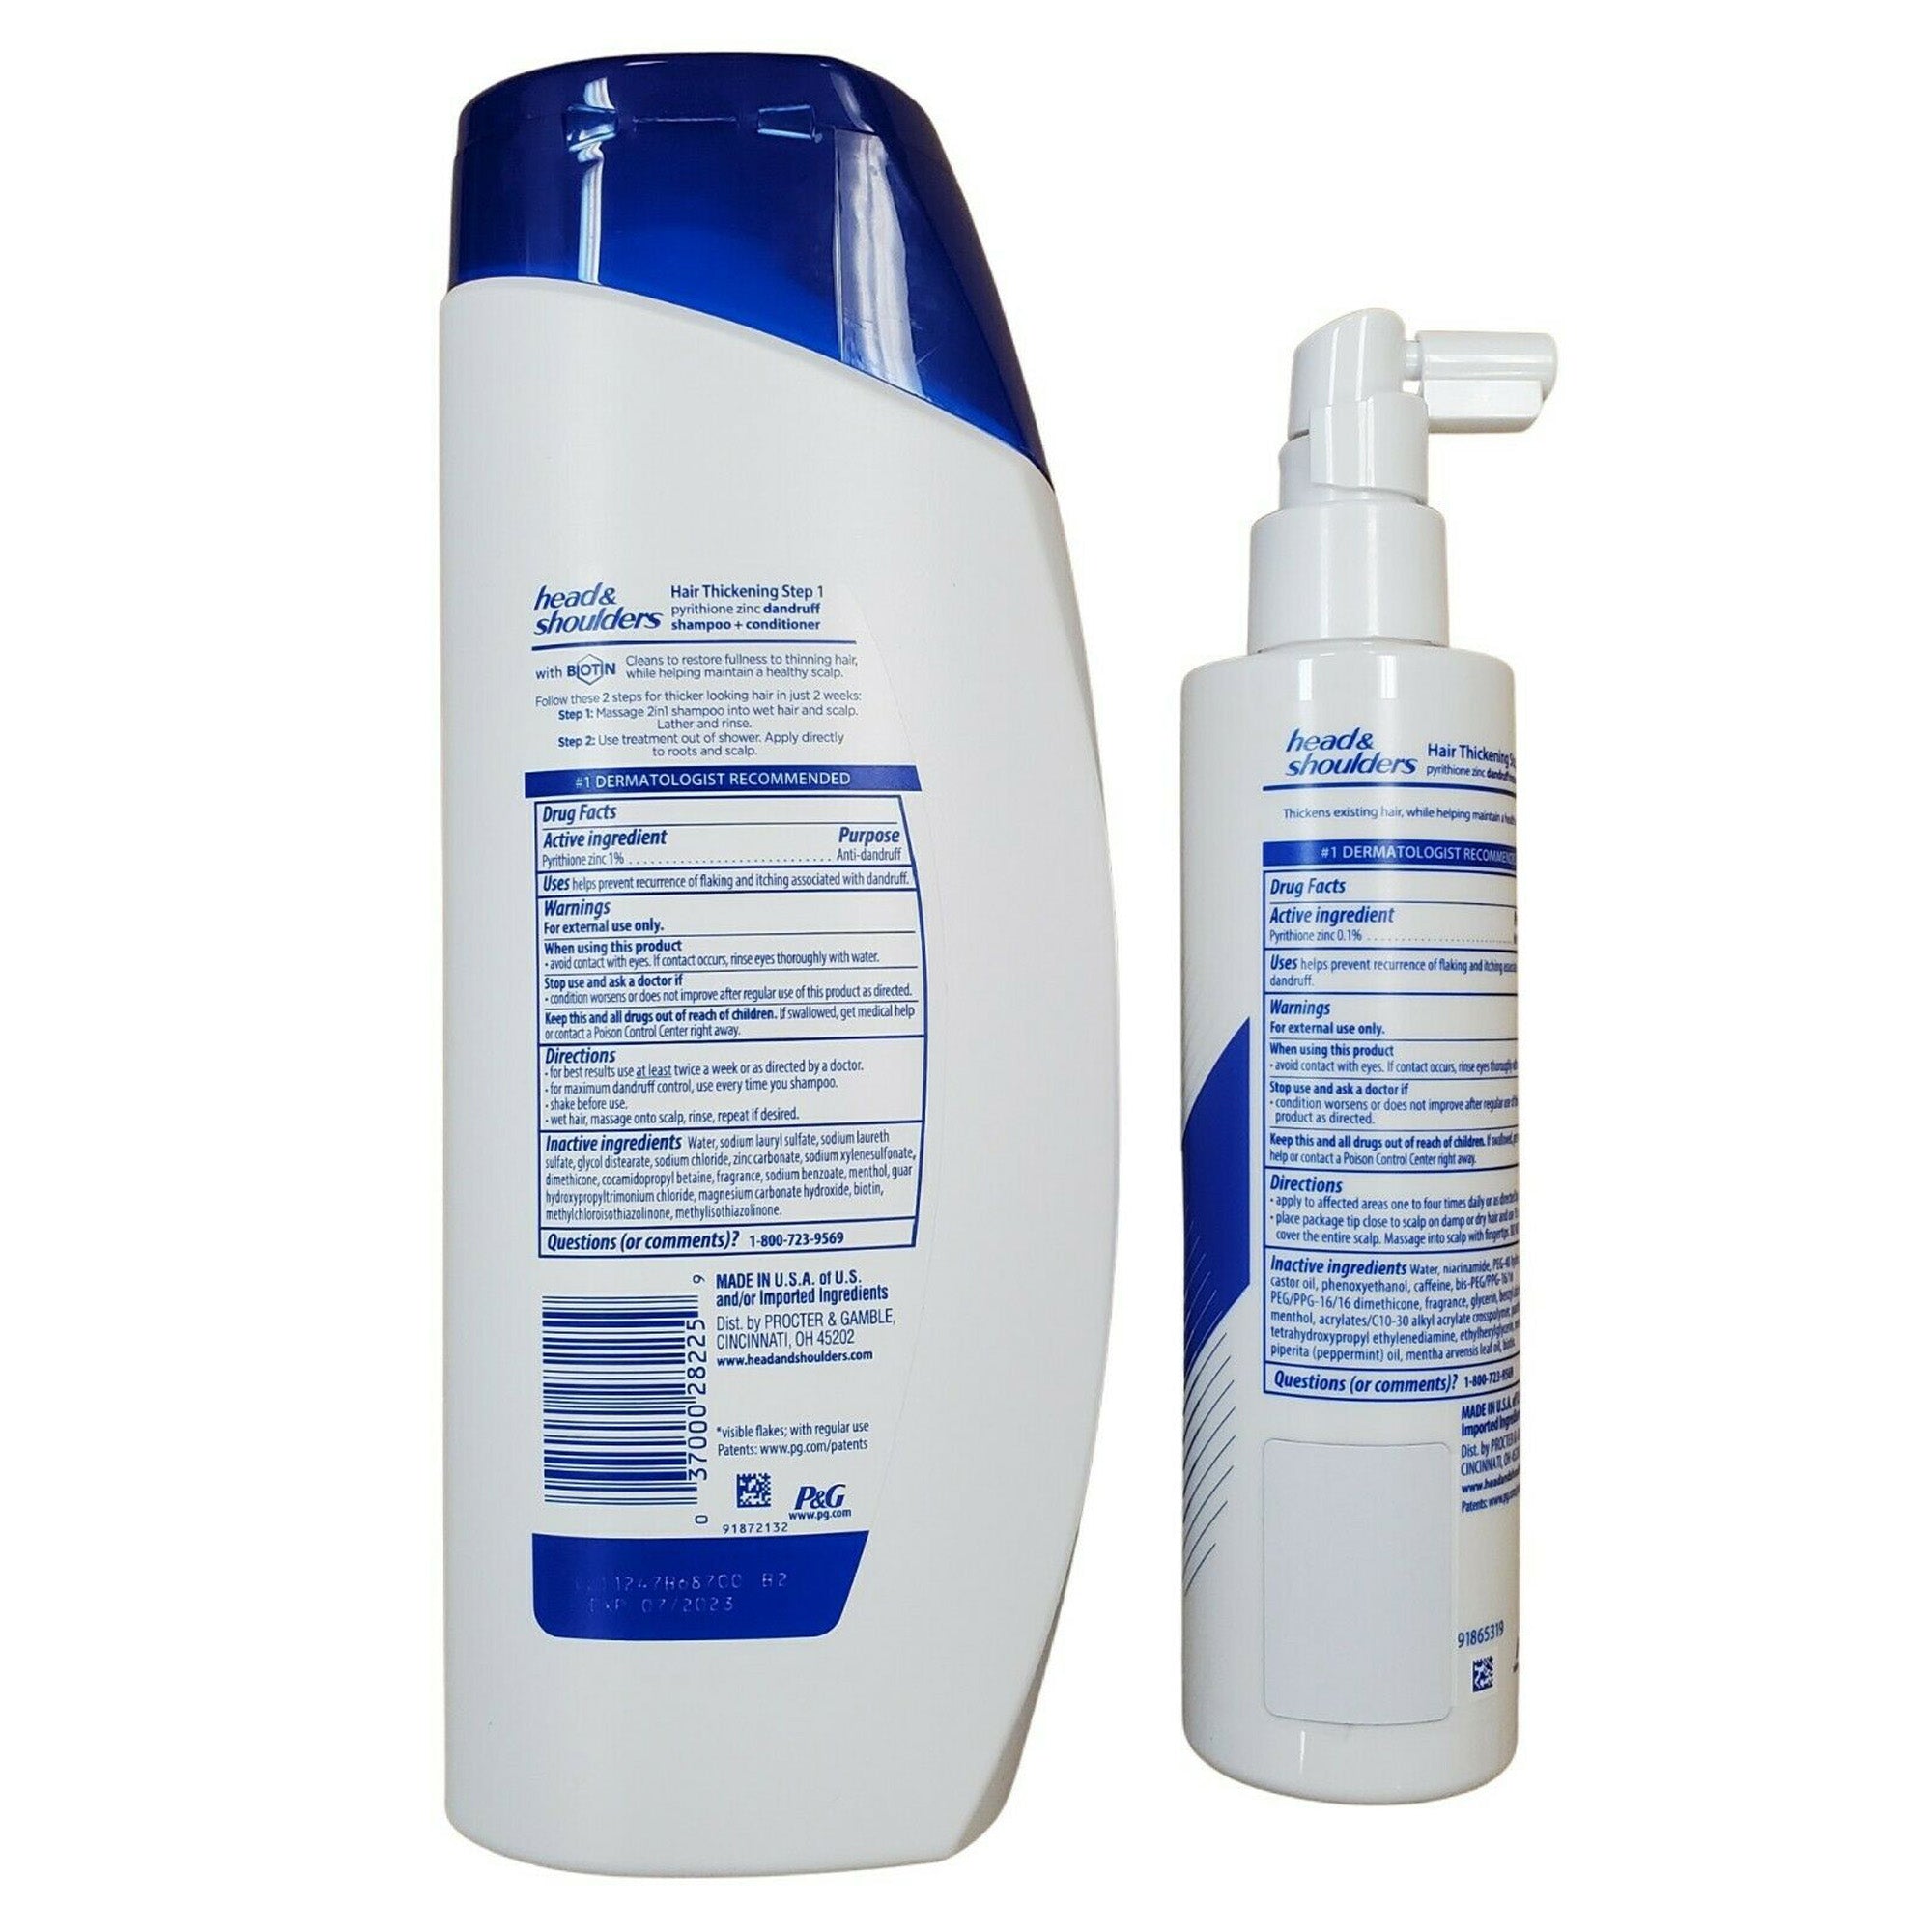 Head & Shoulders Hair Thickening 2 in1 Shampoo, Conditioner, Treatment 23.7-6.7OZ